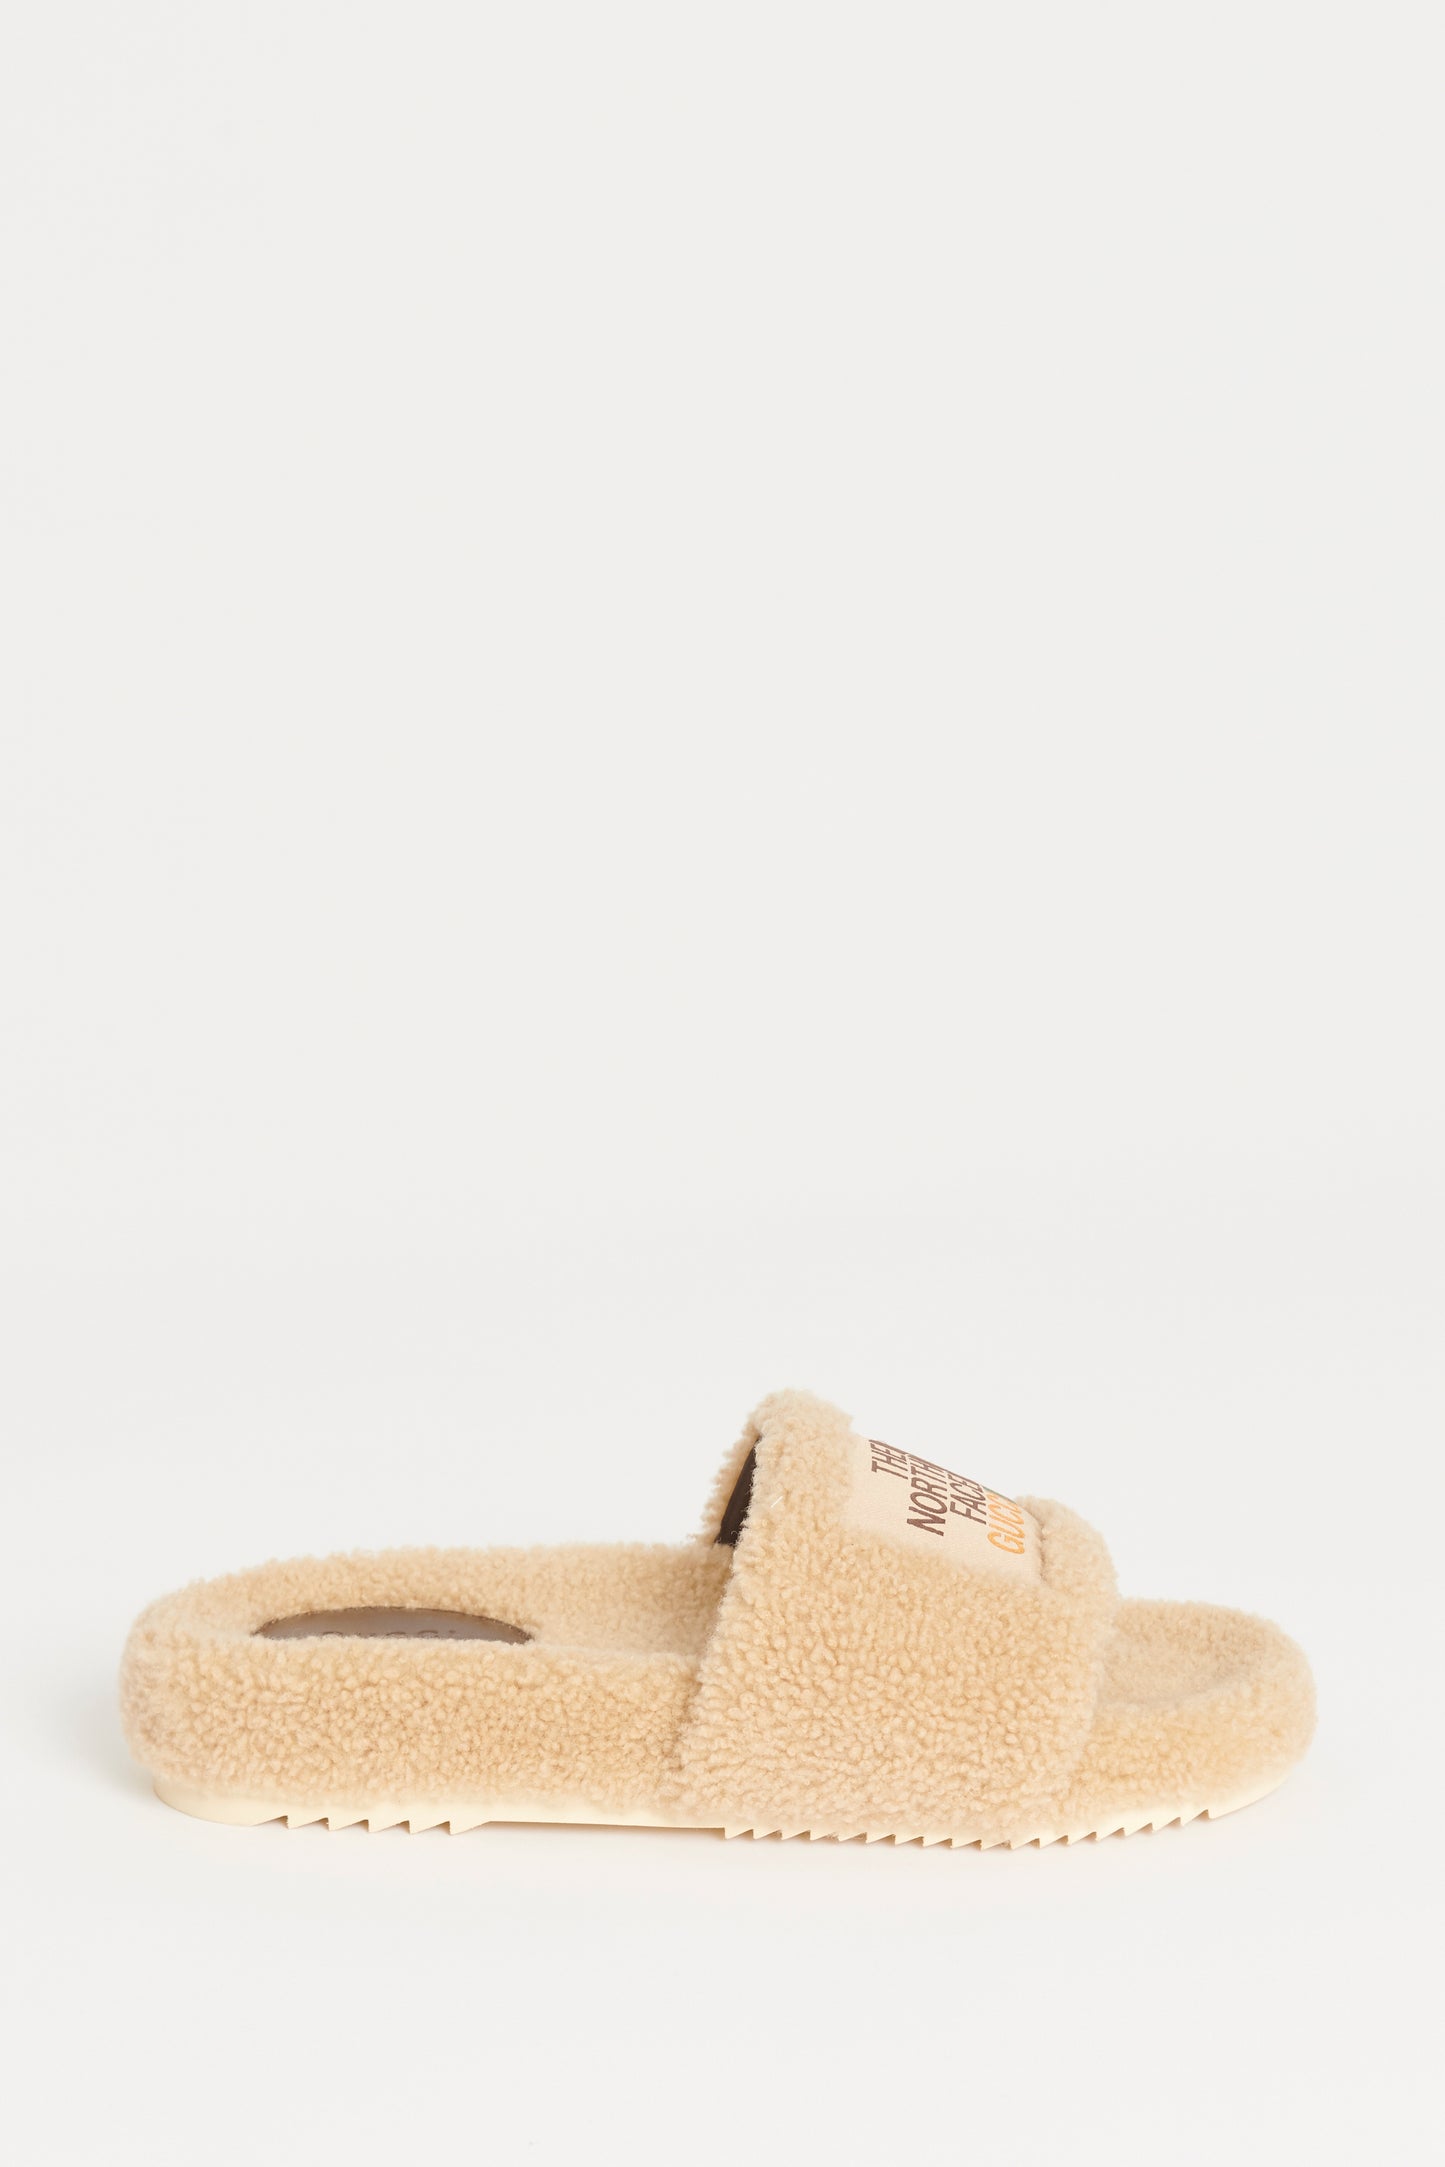 Butterscotch Shearling Preowned Slides